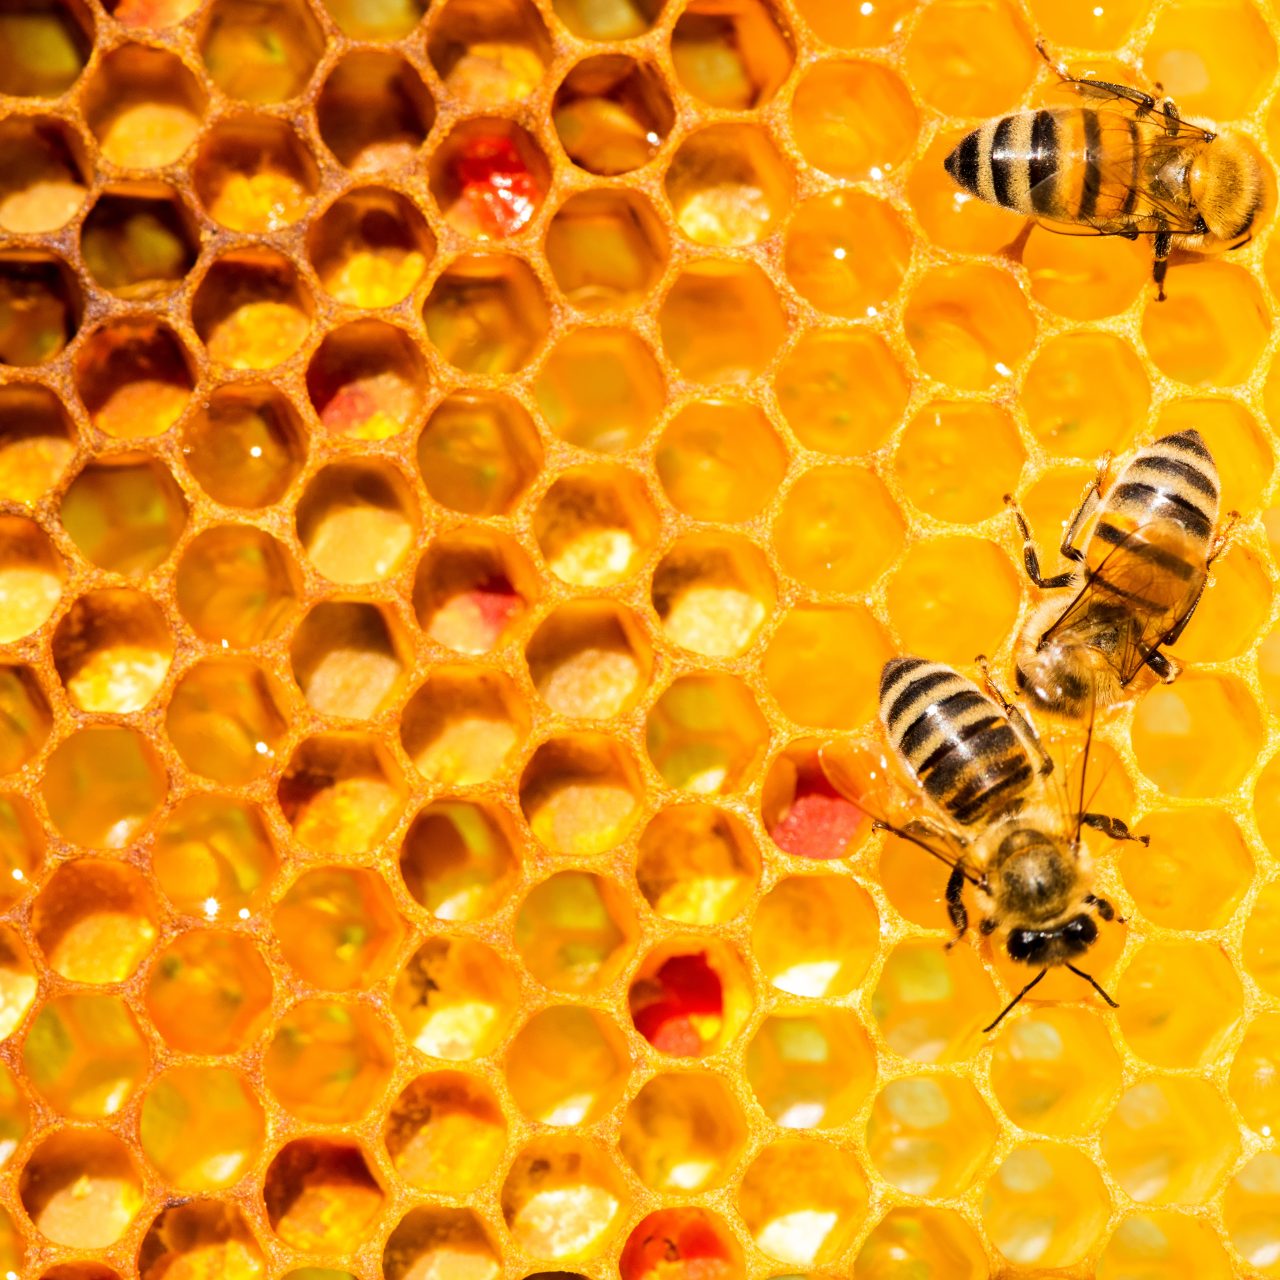 Closeup,Of,Bees,On,Honeycomb,In,Apiary,-,Selective,Focus,